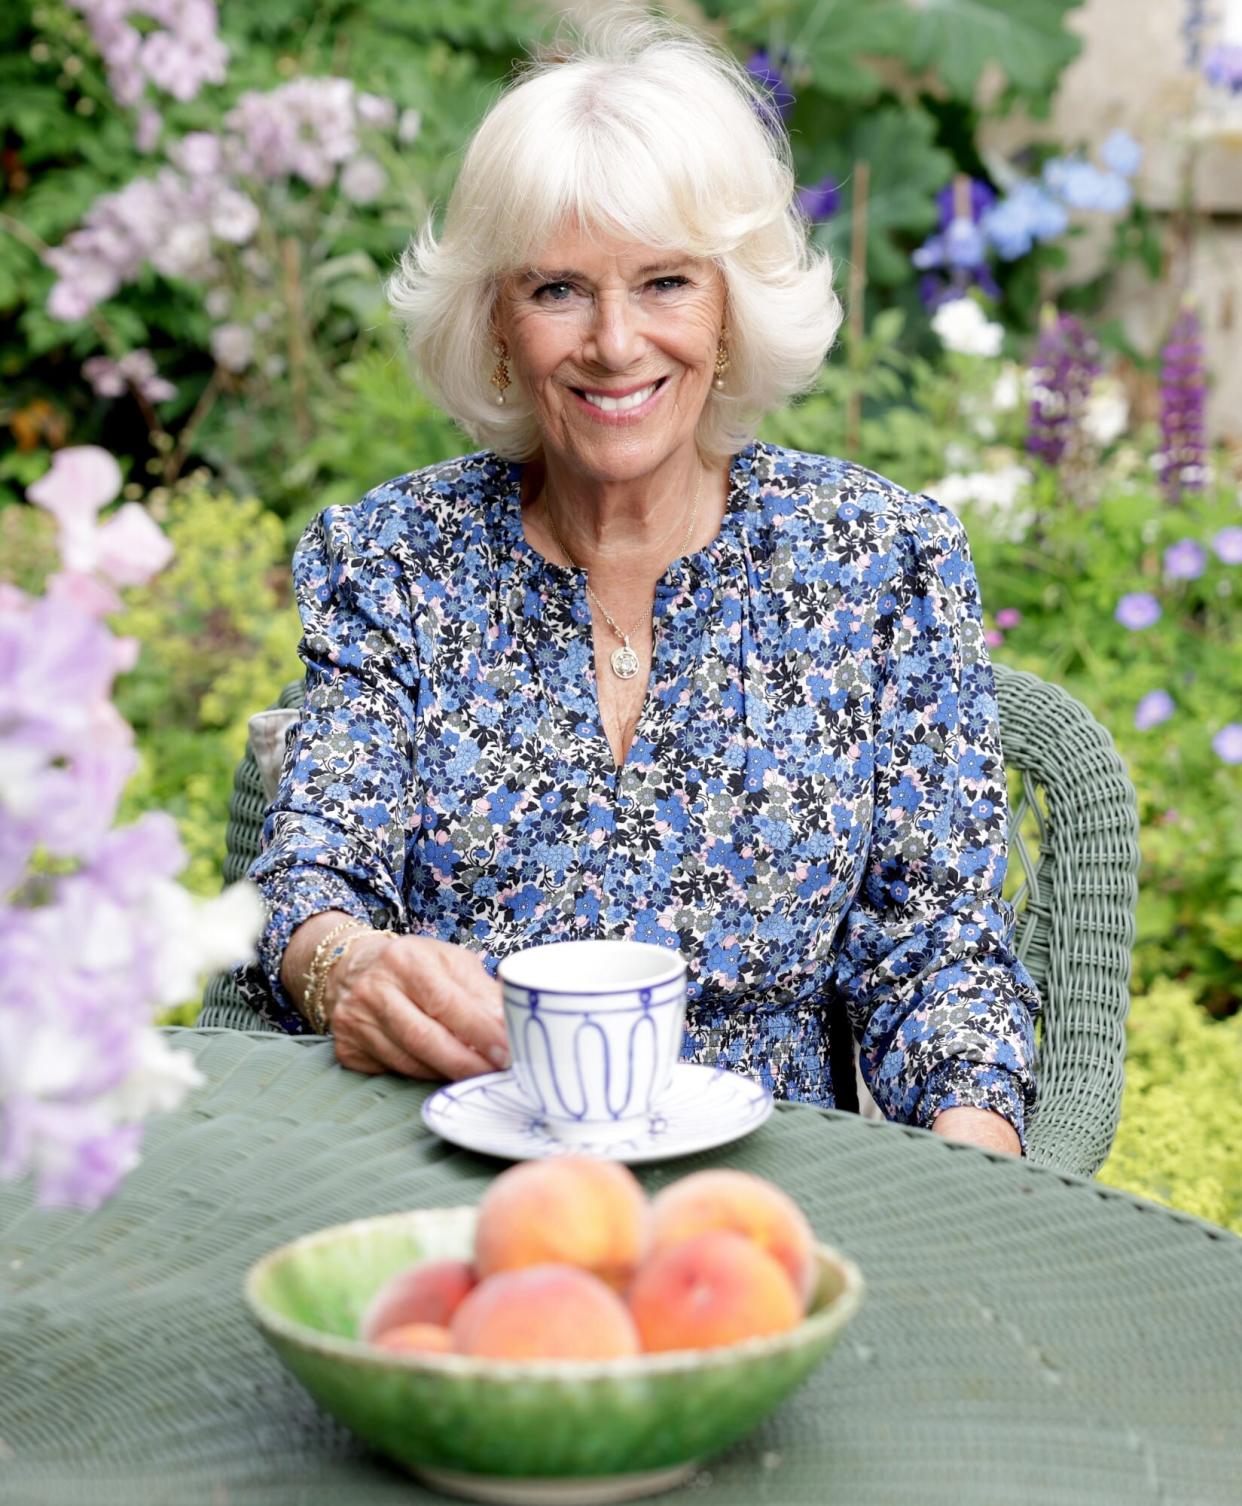 WILTSHIRE, UNITED KINGDOM – JULY 15: (NO SALES. STRICTLY FOR EDITORIAL USE ONLY. NOT FOR USE AFTER JULY 24, 2022 WITHOUT PRIOR PERMISSION FROM CLARENCE HOUSE) In this handout image provided Clarence House and released on July 15 2022, HRH Camilla, Duchess of Cornwall poses for an official portrait to mark HRH's 75th birthday at her home in Wiltshire, United Kingdom. (Photo by Chris Jackson / Clarence House via Getty Images).